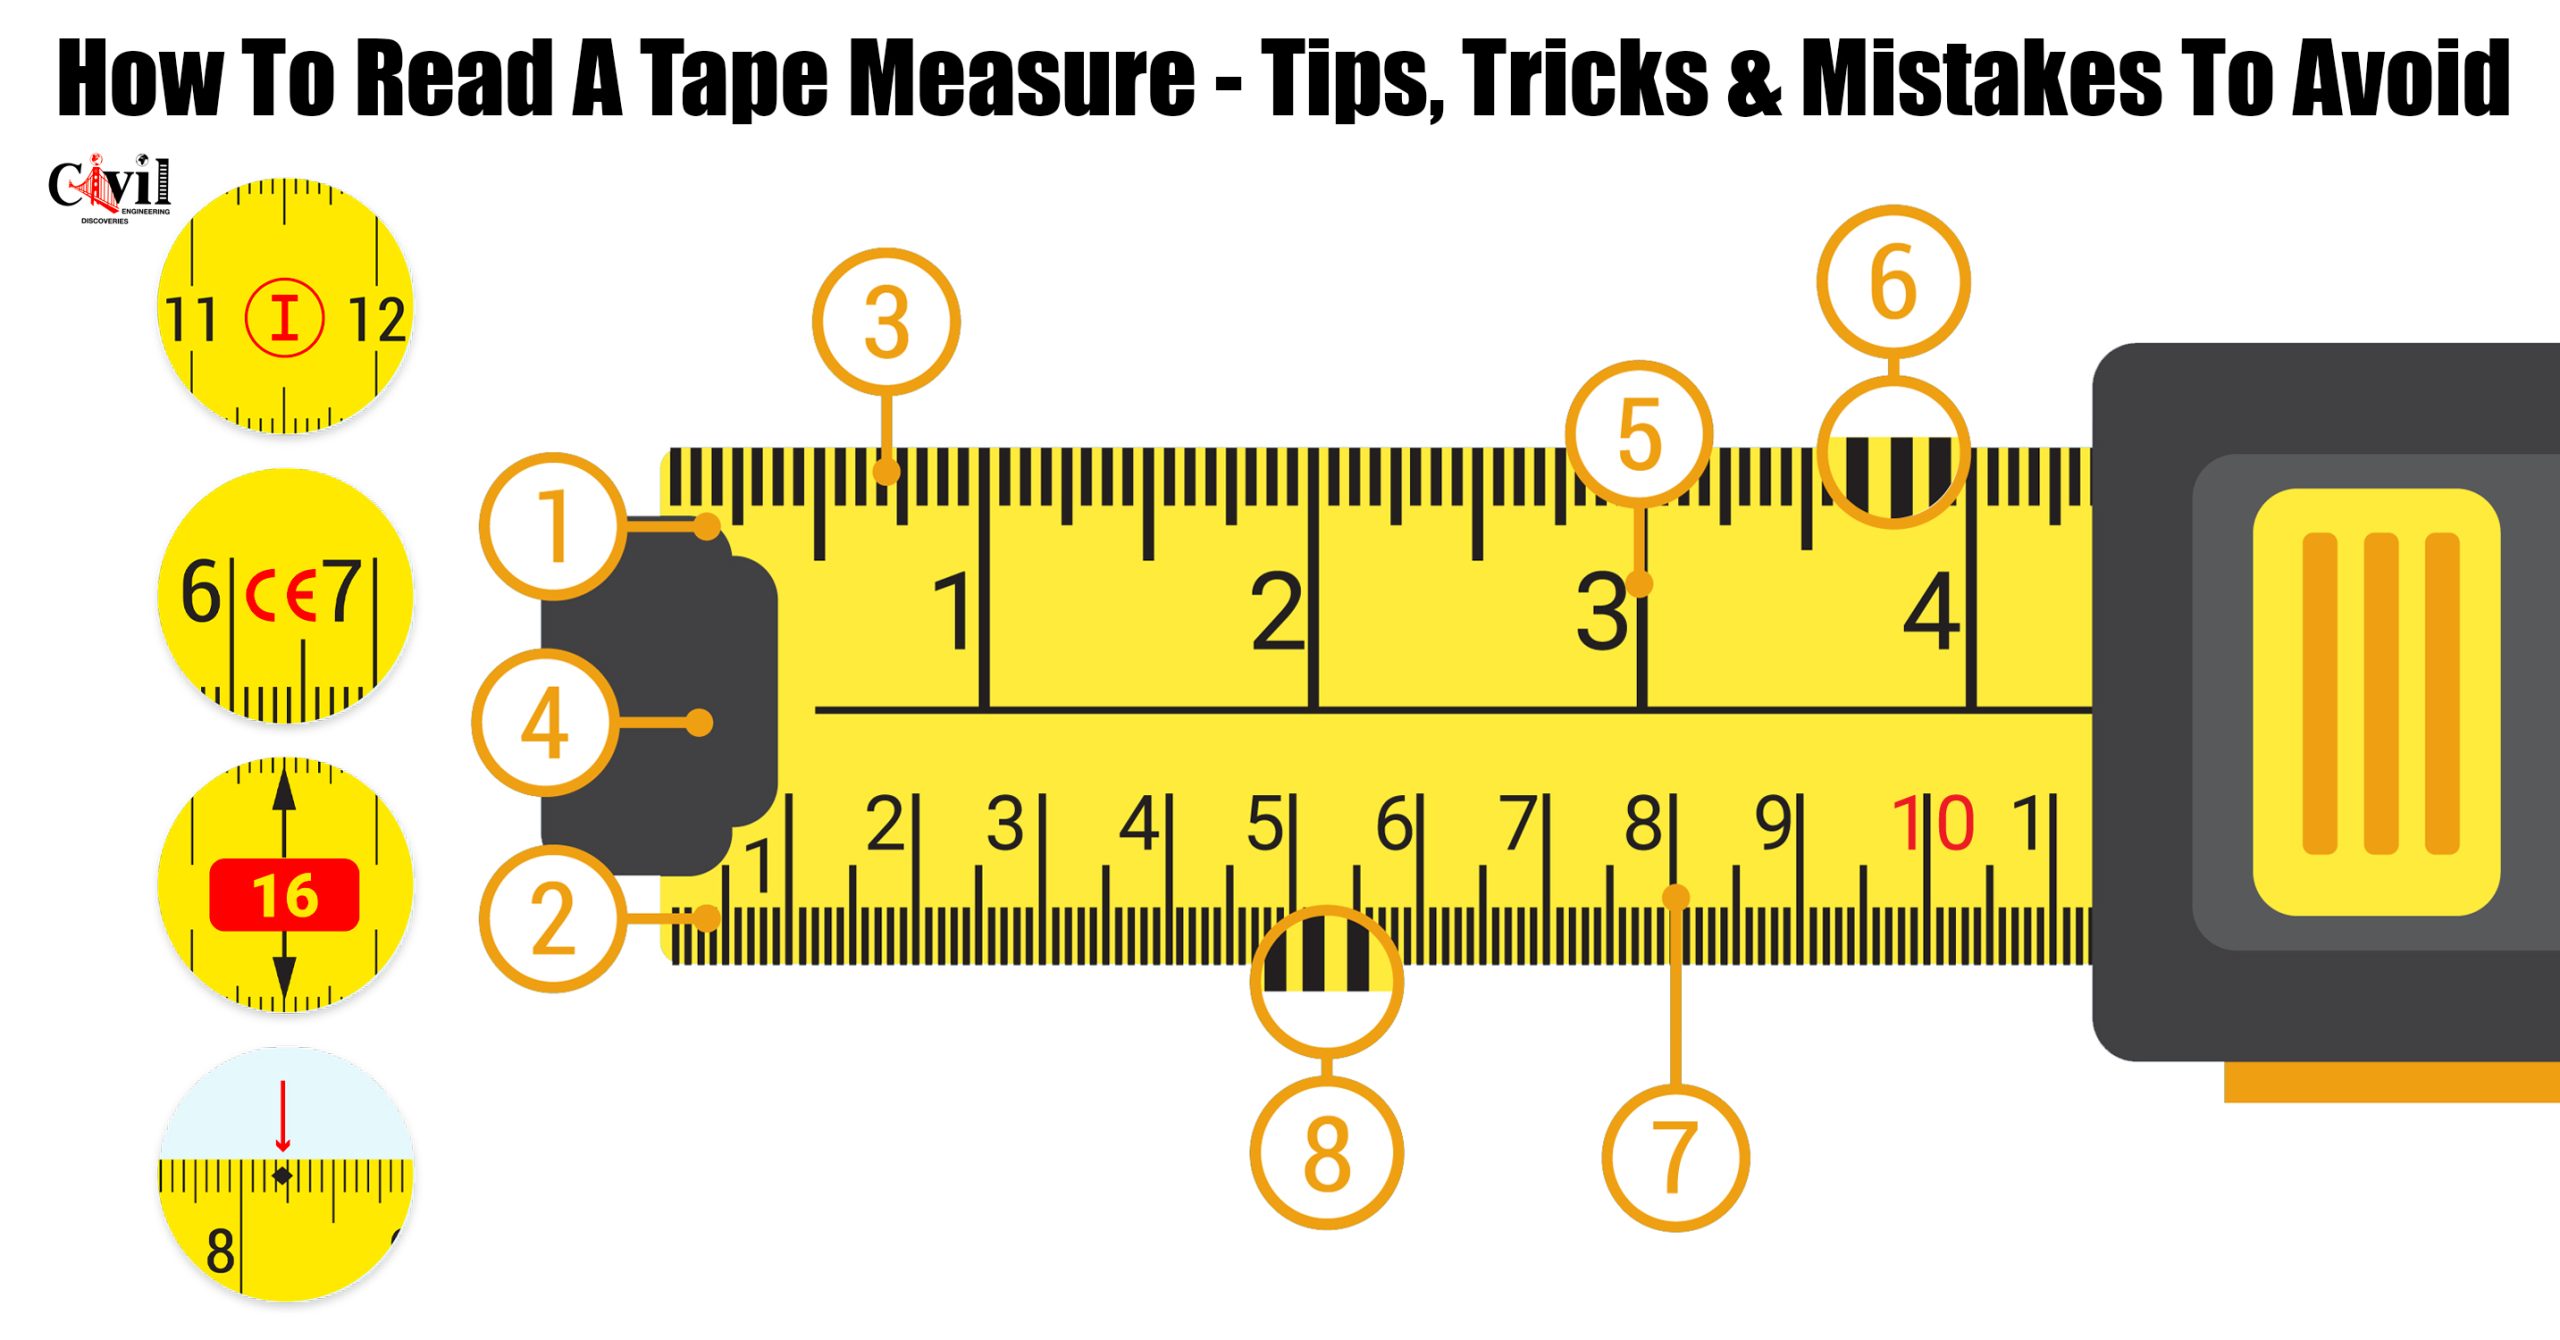 https://engineeringdiscoveries.com/wp-content/uploads/2023/05/How-To-Read-A-Tape-Measure-Tips-Tricks-Mistakes-To-Avoid-1-scaled.jpg